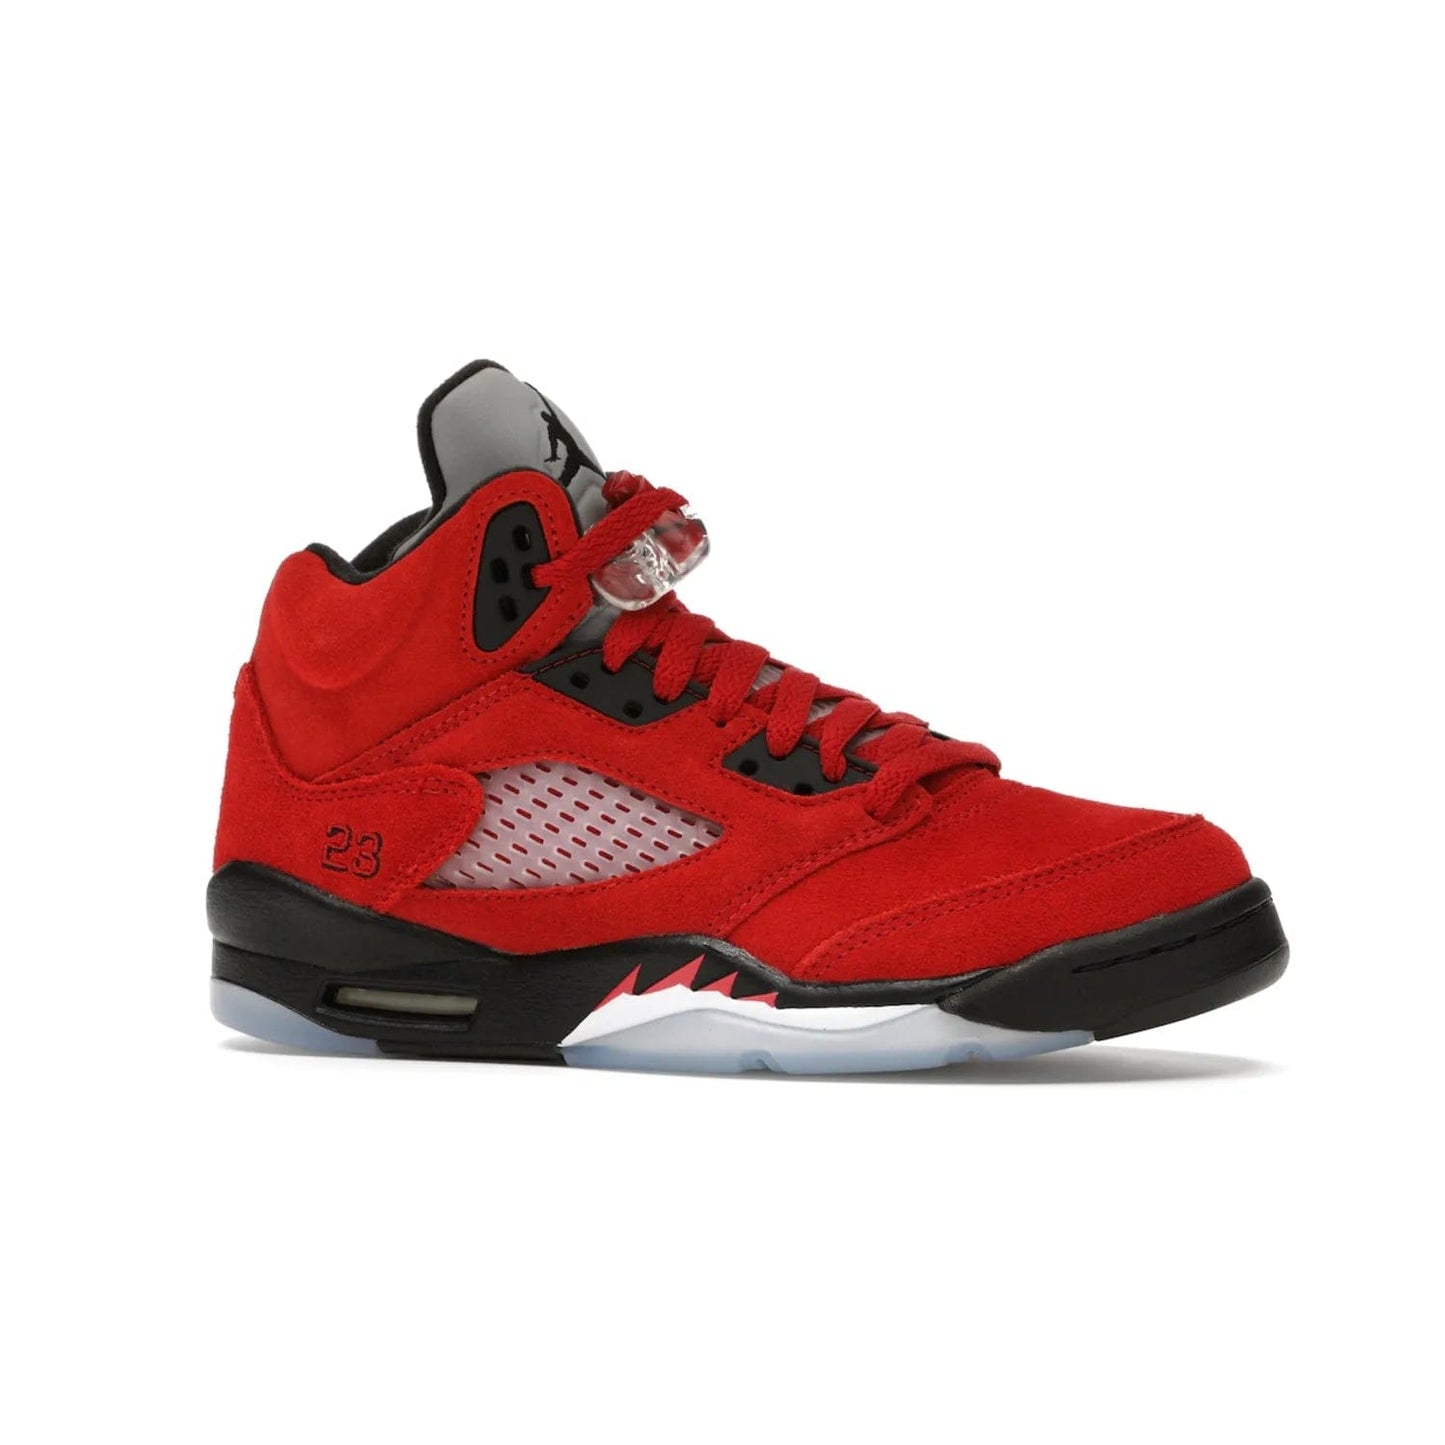 Jordan 5 Retro Raging Bull Red (2021) (GS) - Image 3 - Only at www.BallersClubKickz.com - Jordan 5 Retro Raging Bulls Red 2021 GS. Varsity Red suede upper with embroidered number 23, black leather detail, red laces, and midsole with air cushioning. Jumpman logos on tongue, heel, and outsole. On-trend streetwear and basketball style. Released April 10, 2021.